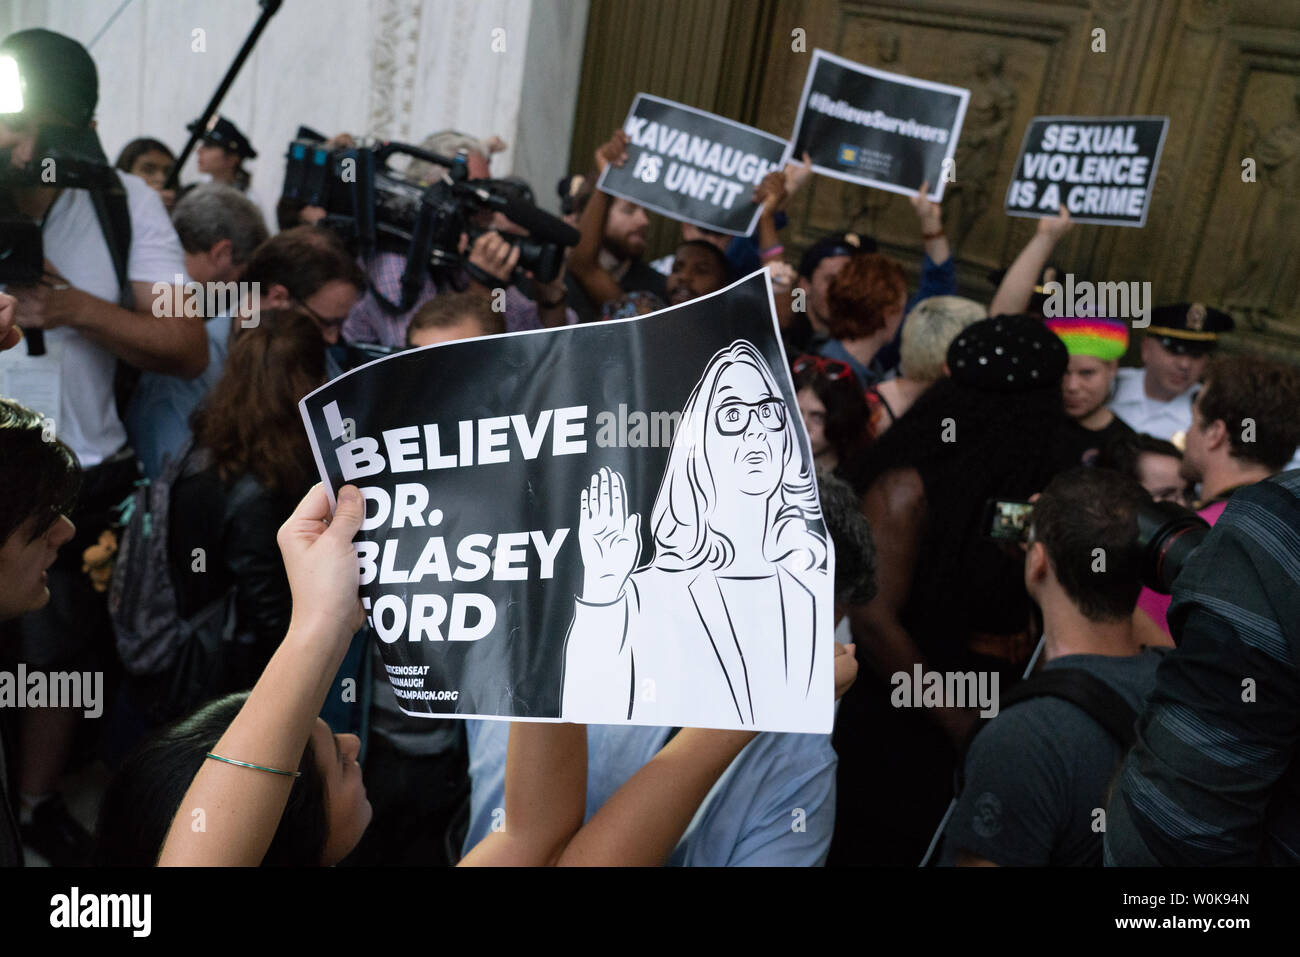 Protesters storm the steps and block the doors of the Supreme Court after over running the Capitol Police against the confirmation and swearing in of Associate Justice Brett Kavanaugh in Washington, D.C. October 6, 2018. Kavanaugh was sworn in inside the Supreme Court this afternoon.       Photo by Ken Cedeno/UPI Stock Photo